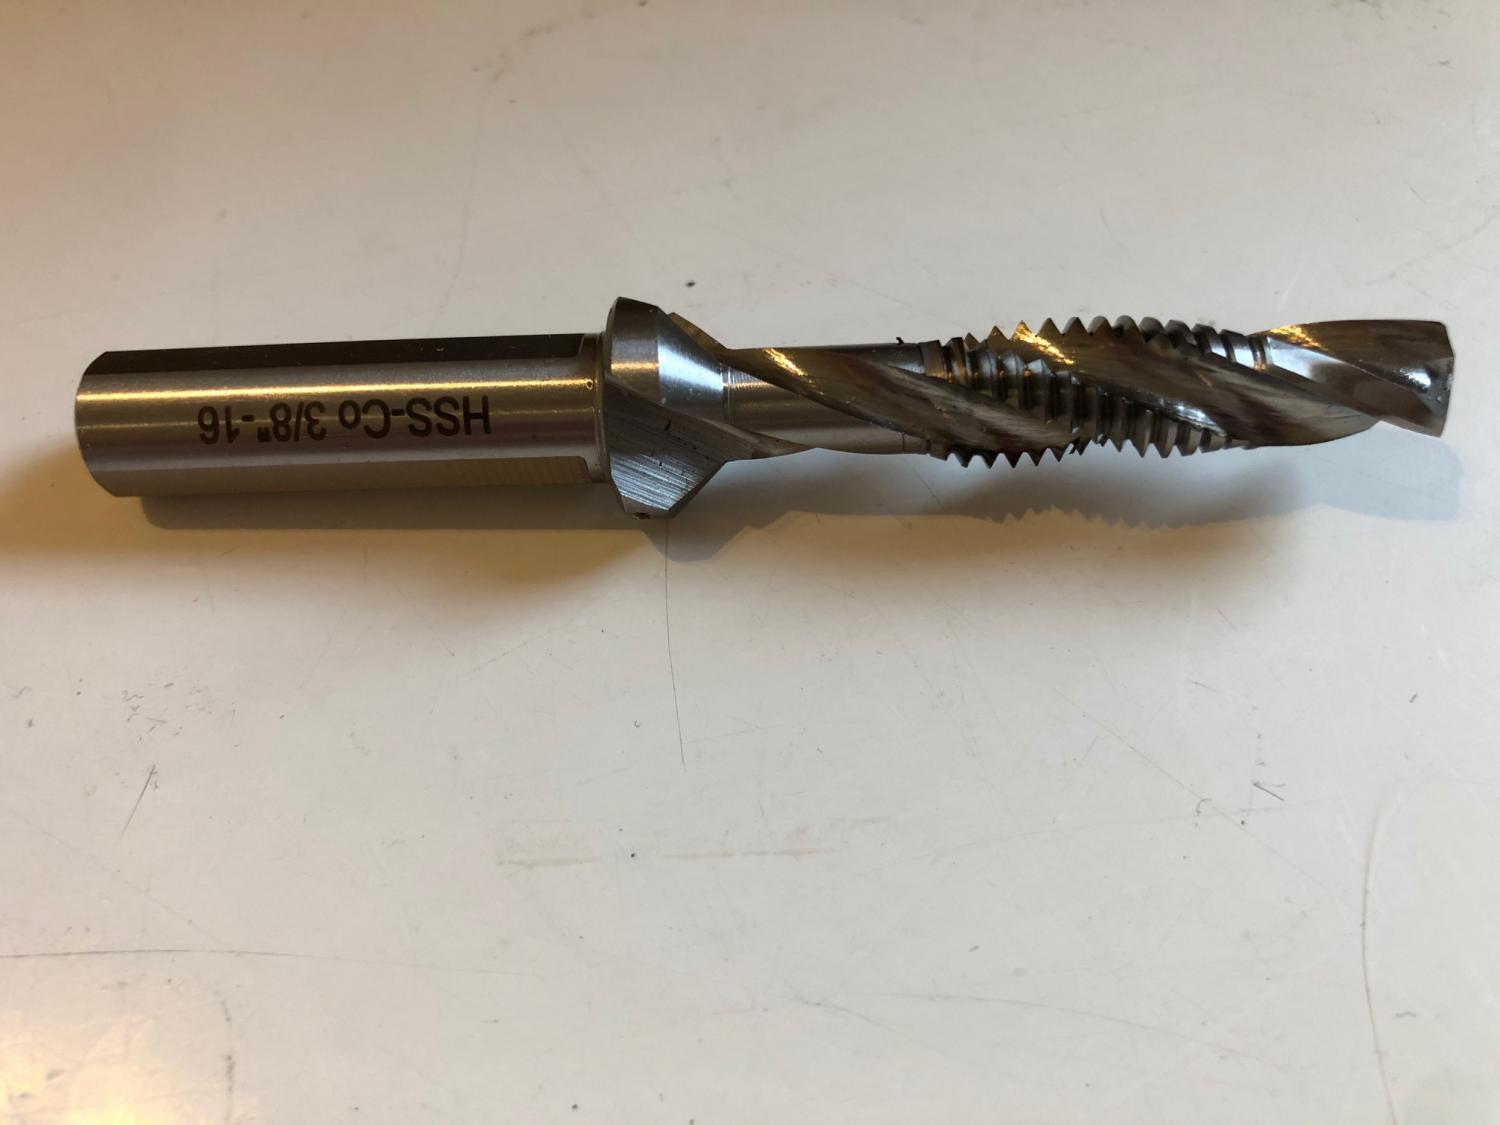 Counter sink drill bit 3/8 self tapping